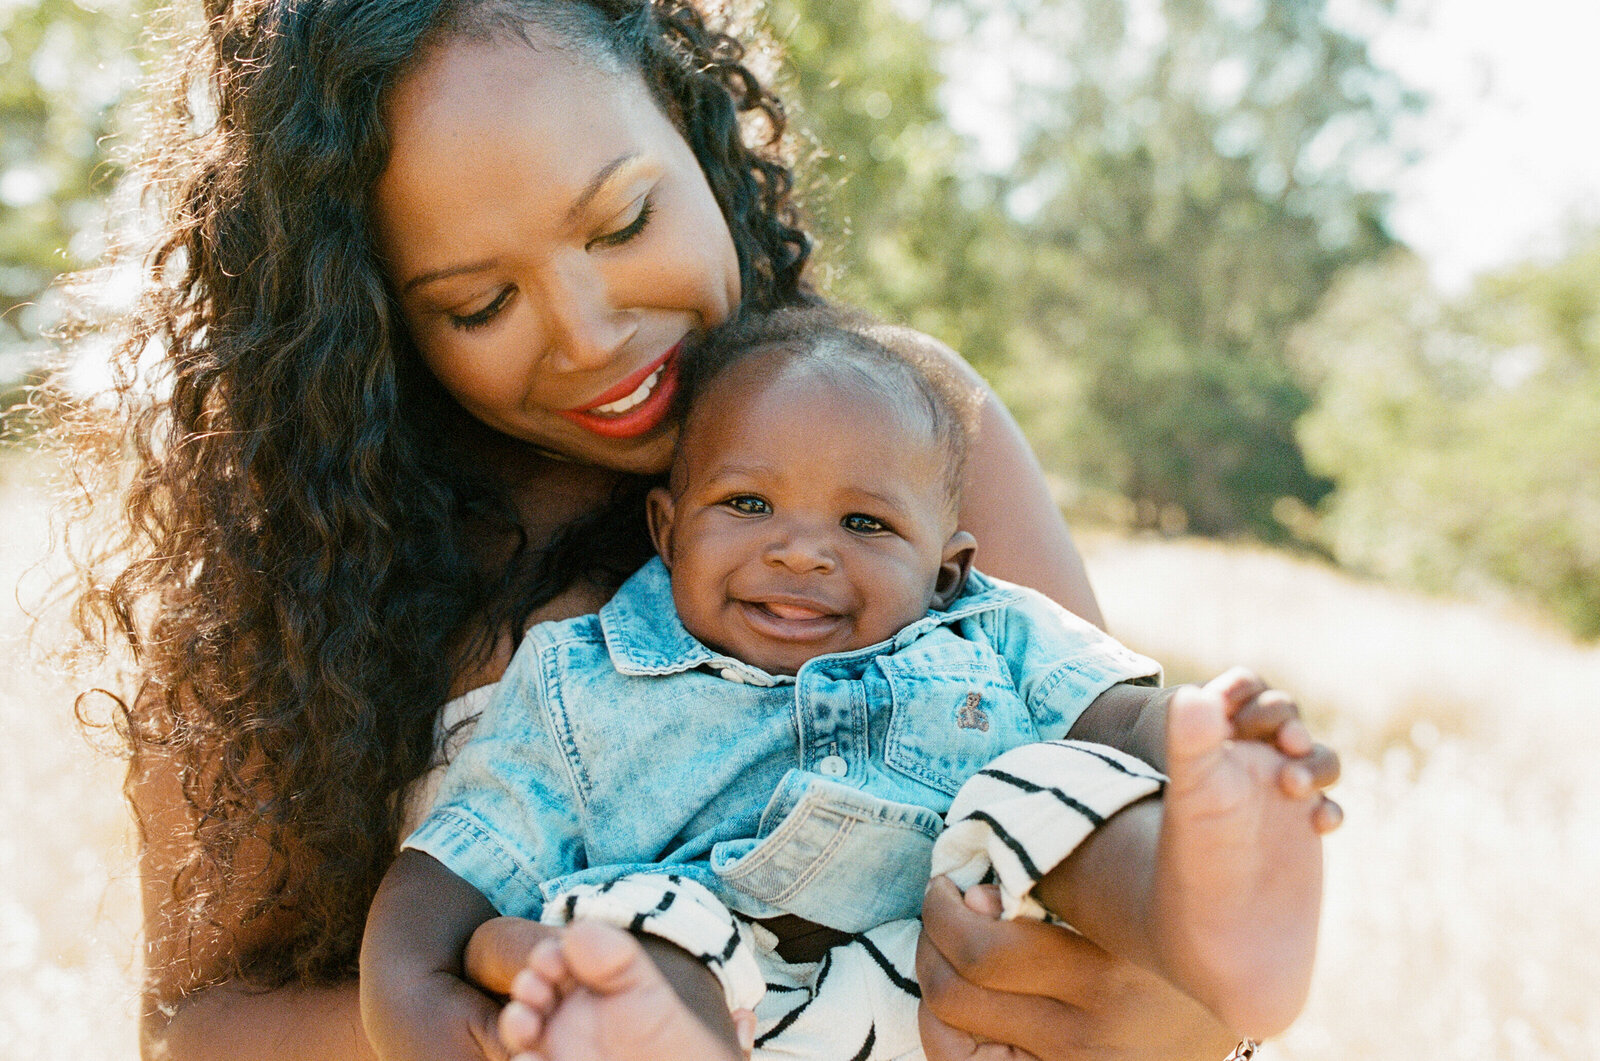 knowland park photo session with Black mom and baby boy